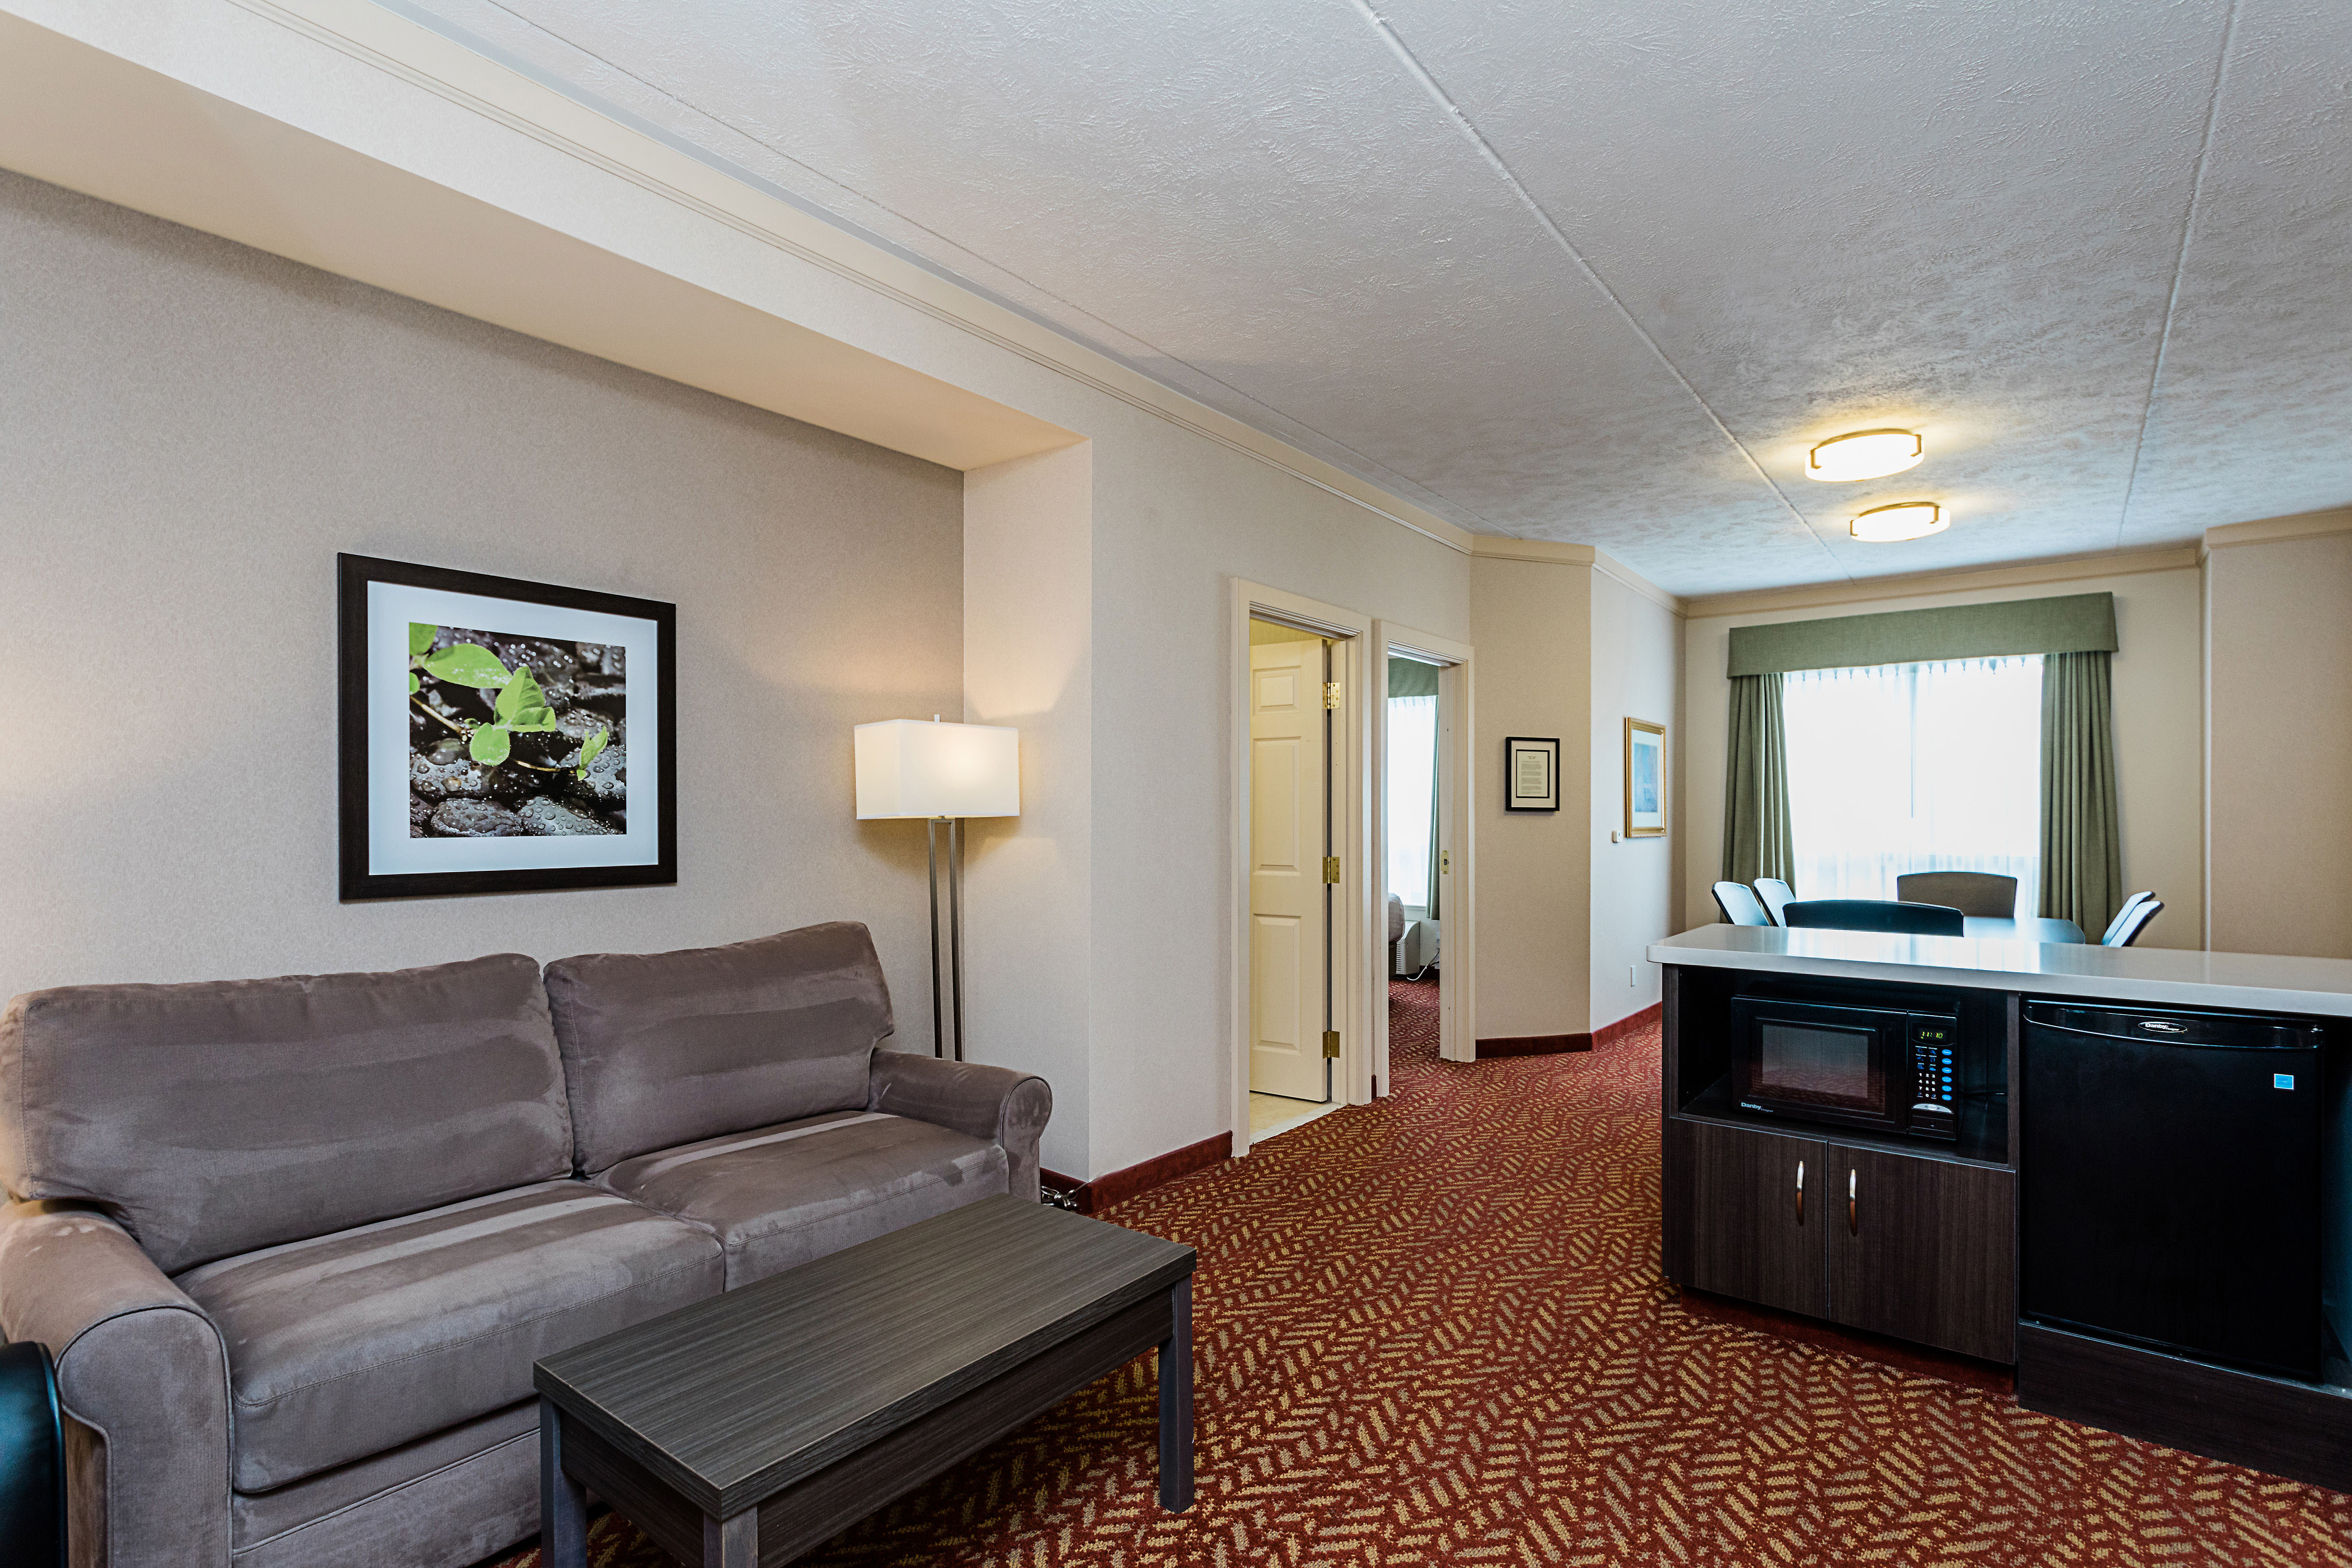 Kitchenette | Exceutive Suite - 1 King Bed | Best Western Inn on the Bay